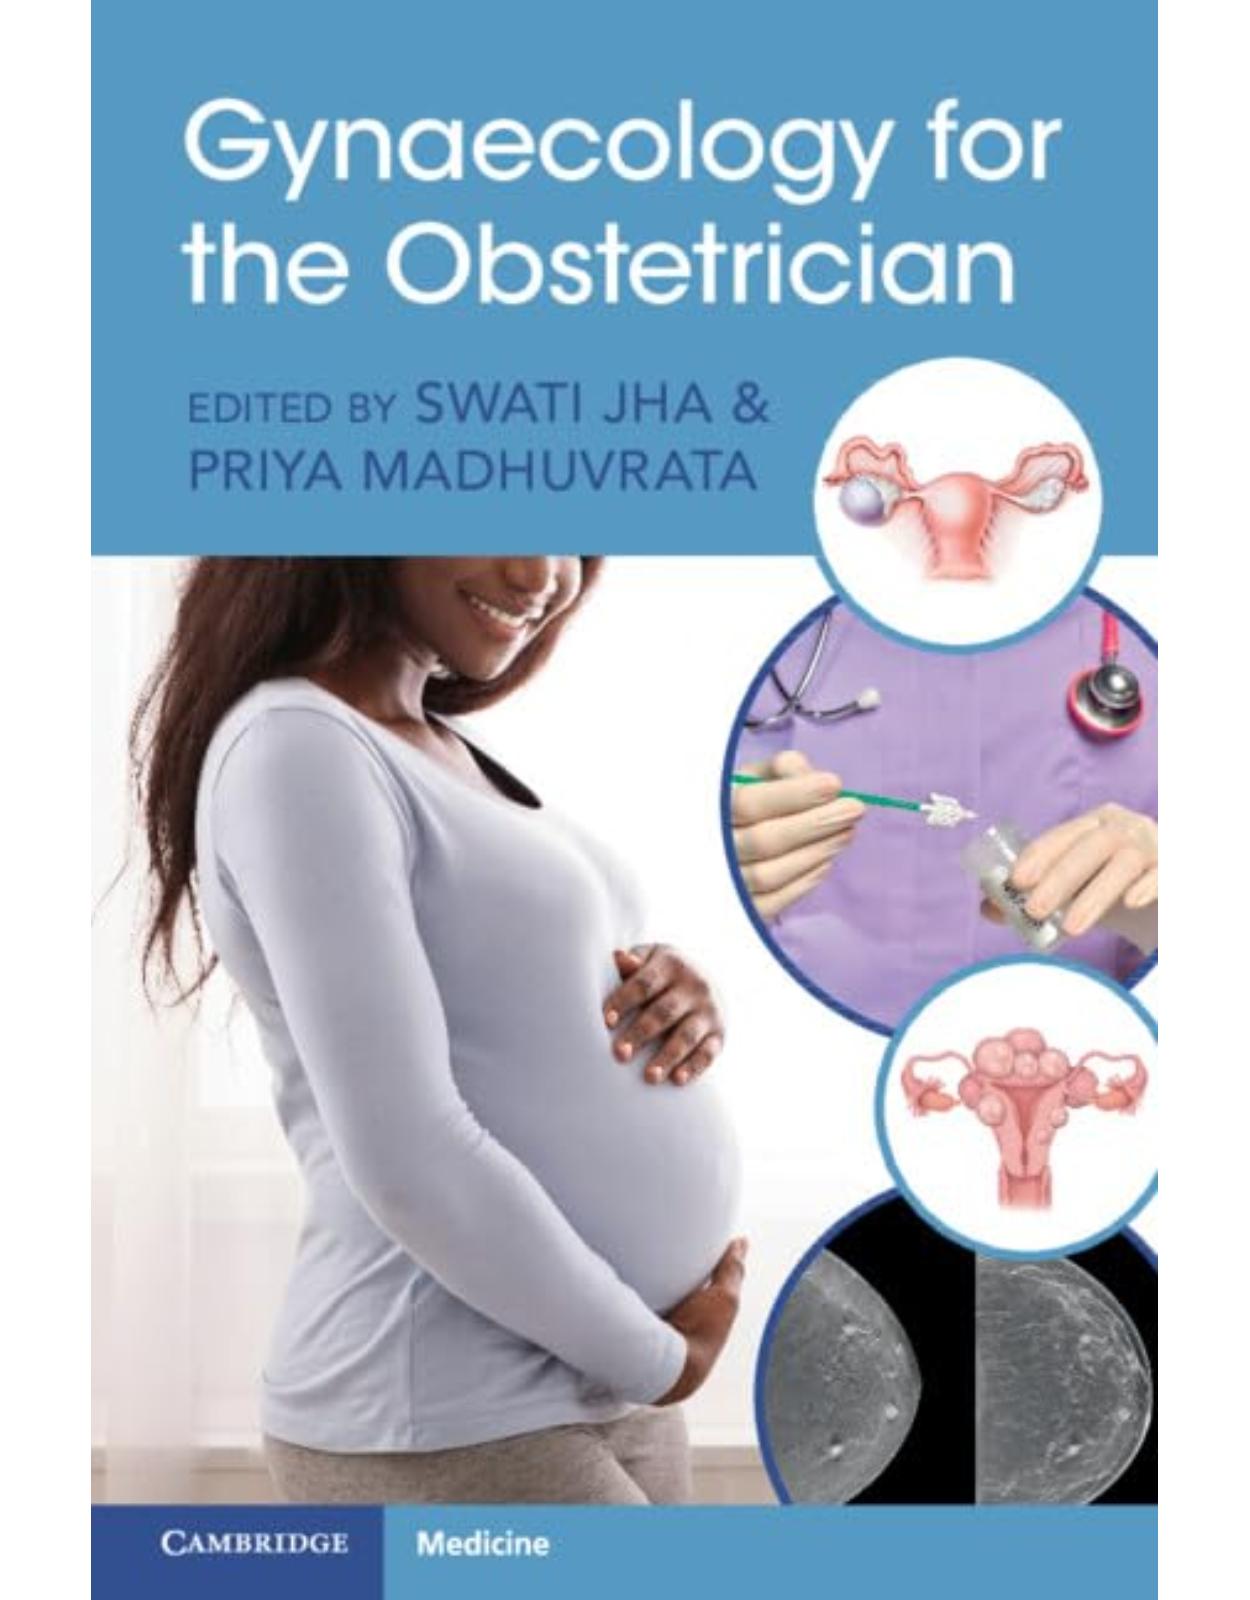 Gynaecology for the Obstetrician